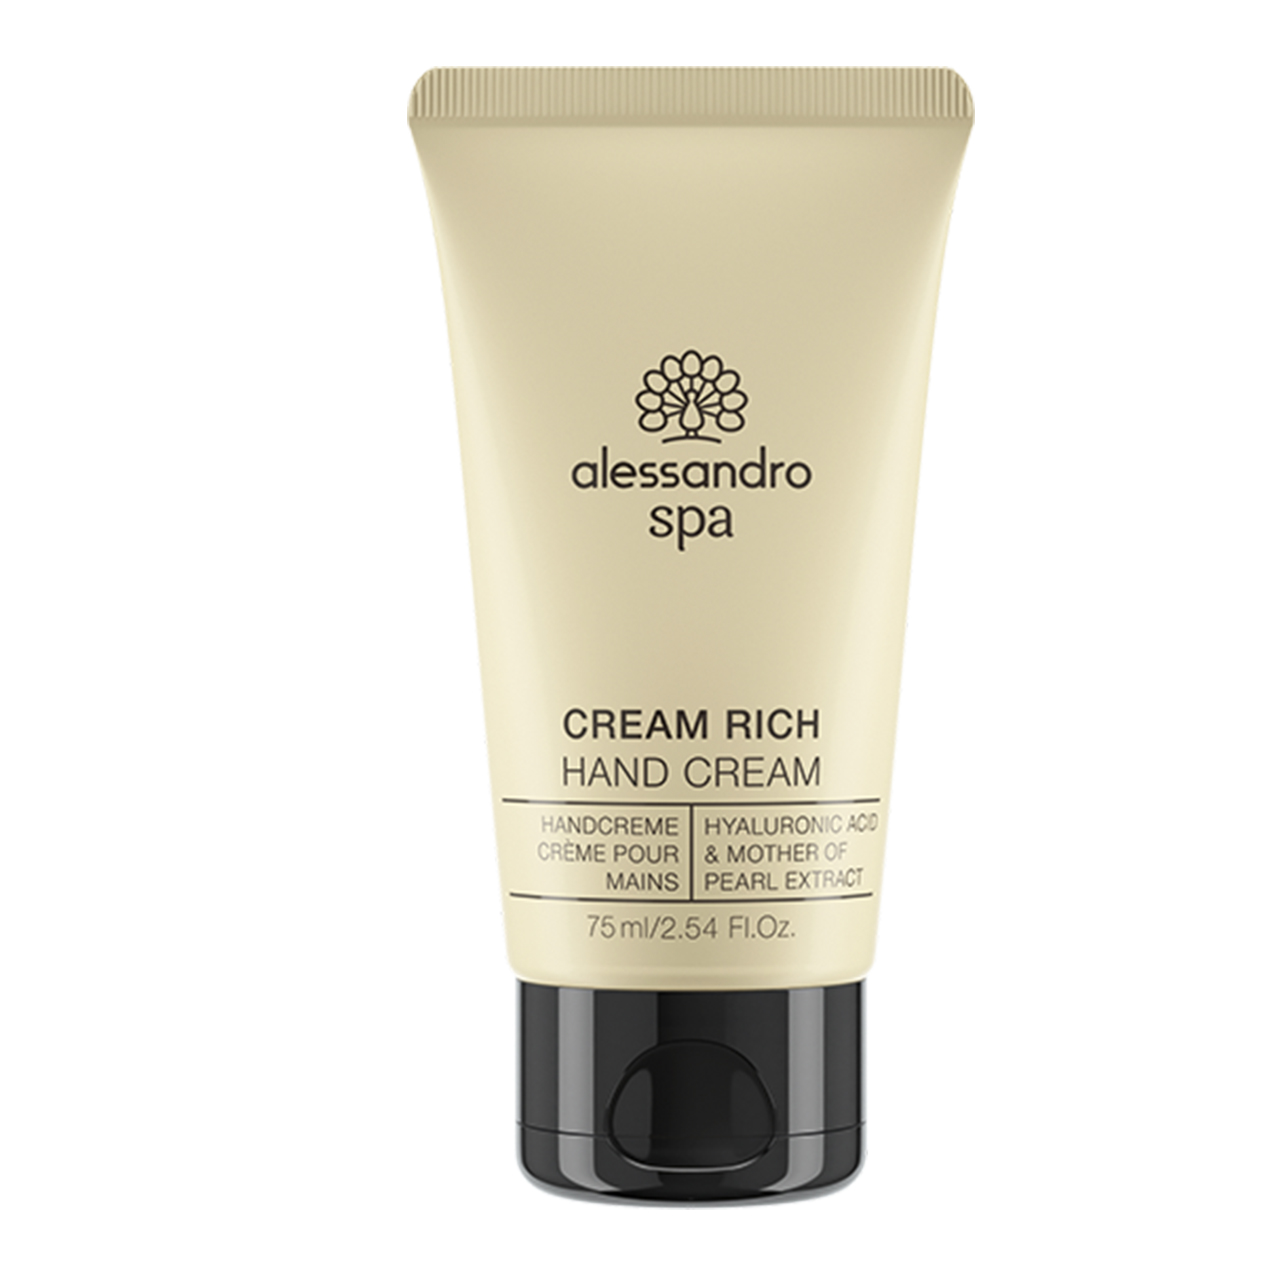 Cream Rich 75ml Tester Hyaluronic Acid & White Lupin Extract Handcreme